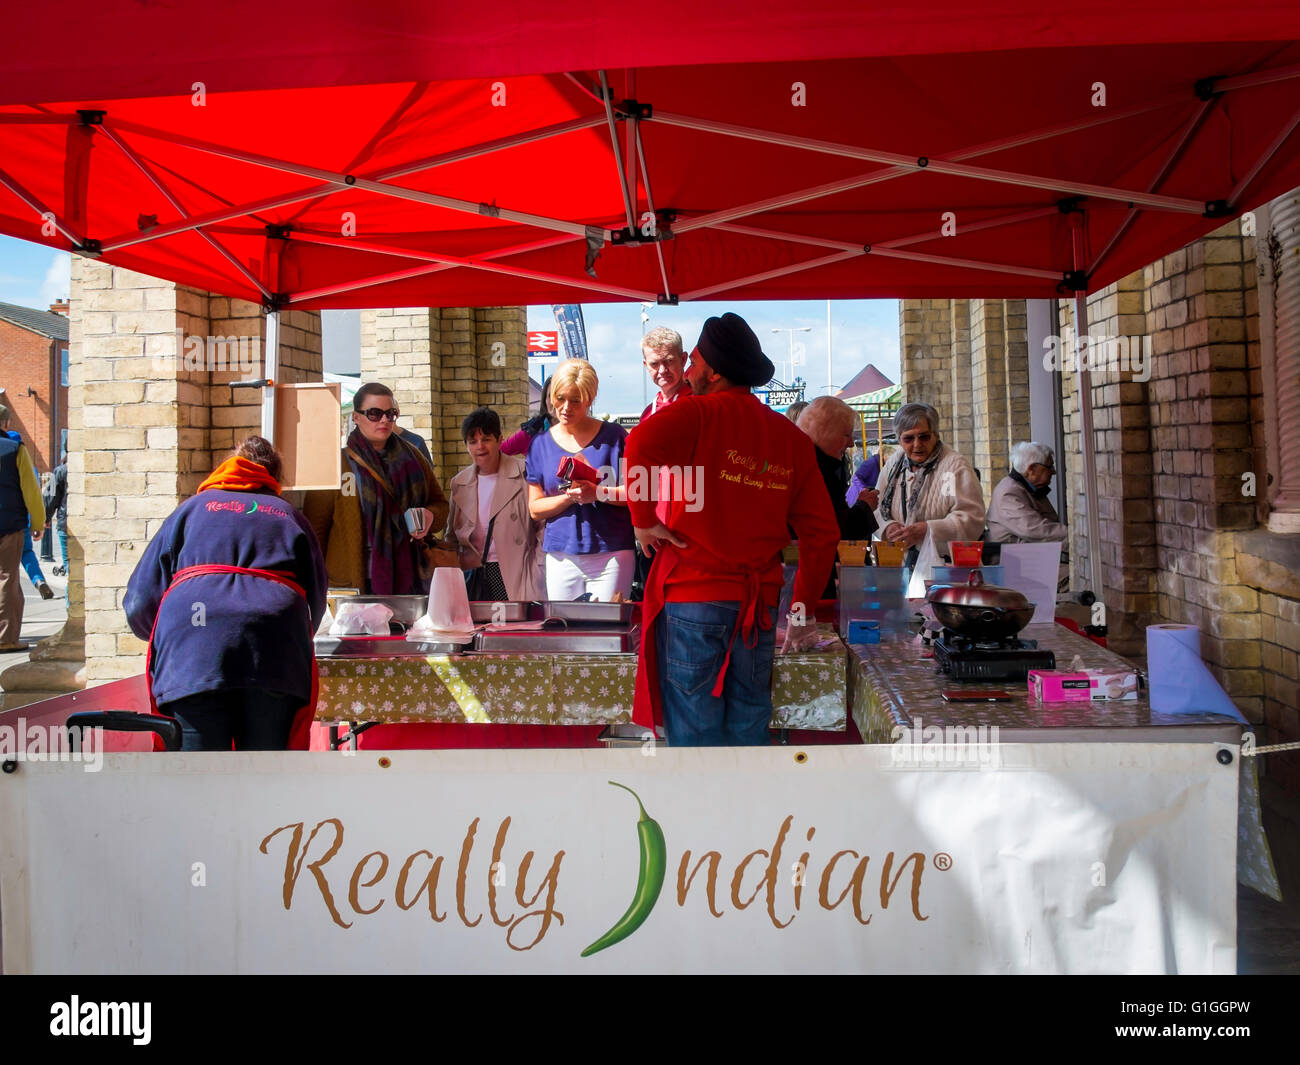 Sikh man and woman stallholders at a UK farmer's market serving cooked 'Really Indian' food to a crowd of people waiting to buy Stock Photo